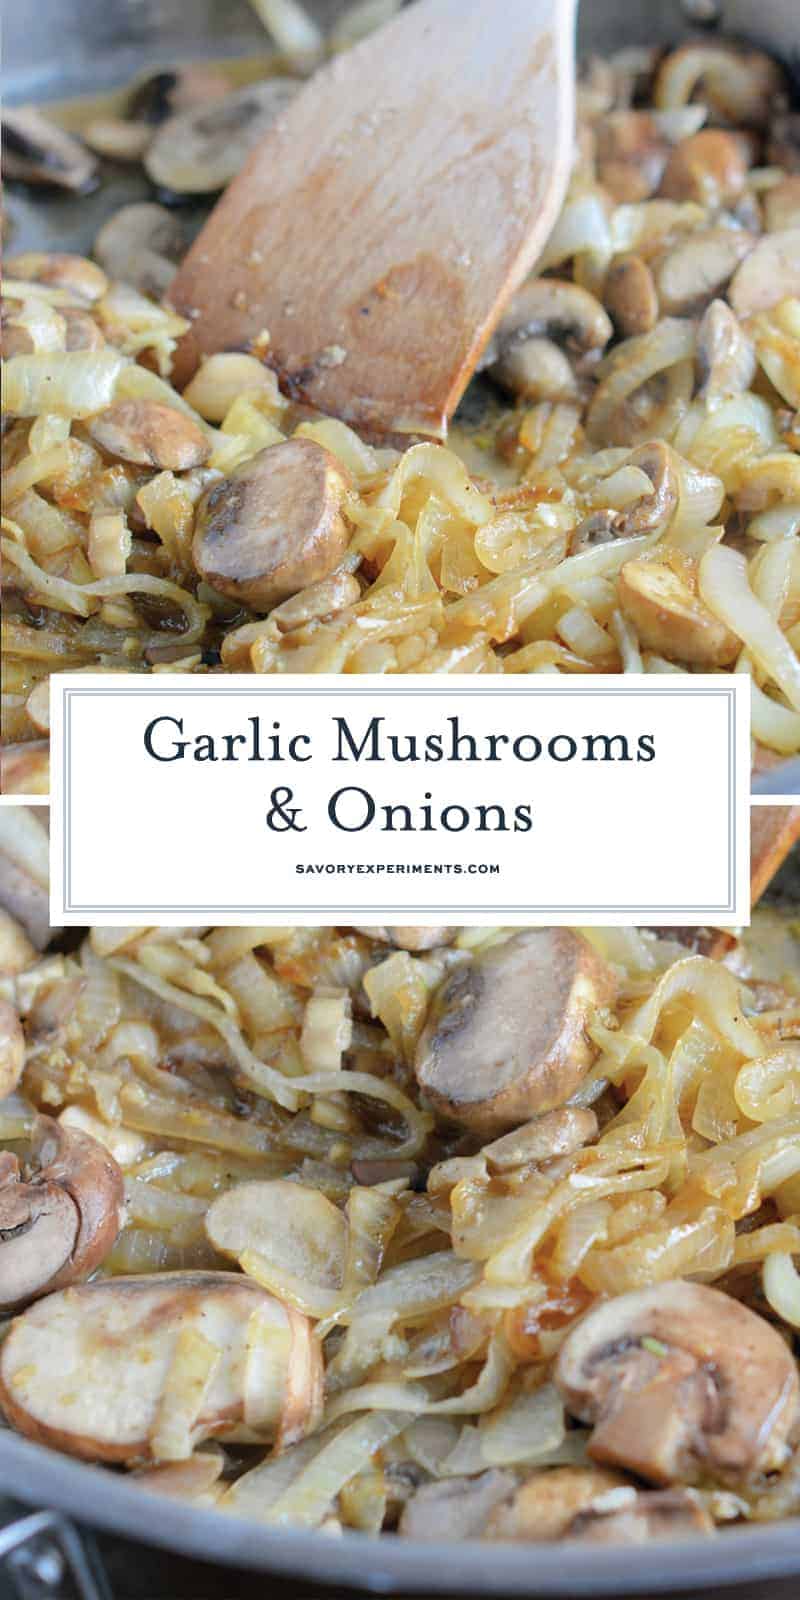 Garlic Mushrooms and Onions are a tasty side dish for any meal. Mushrooms and onions sauteed with fresh garlic and maitre d'hotel butter. #garlicmushrooms #easysidedishes www.savoryexperiments.com 